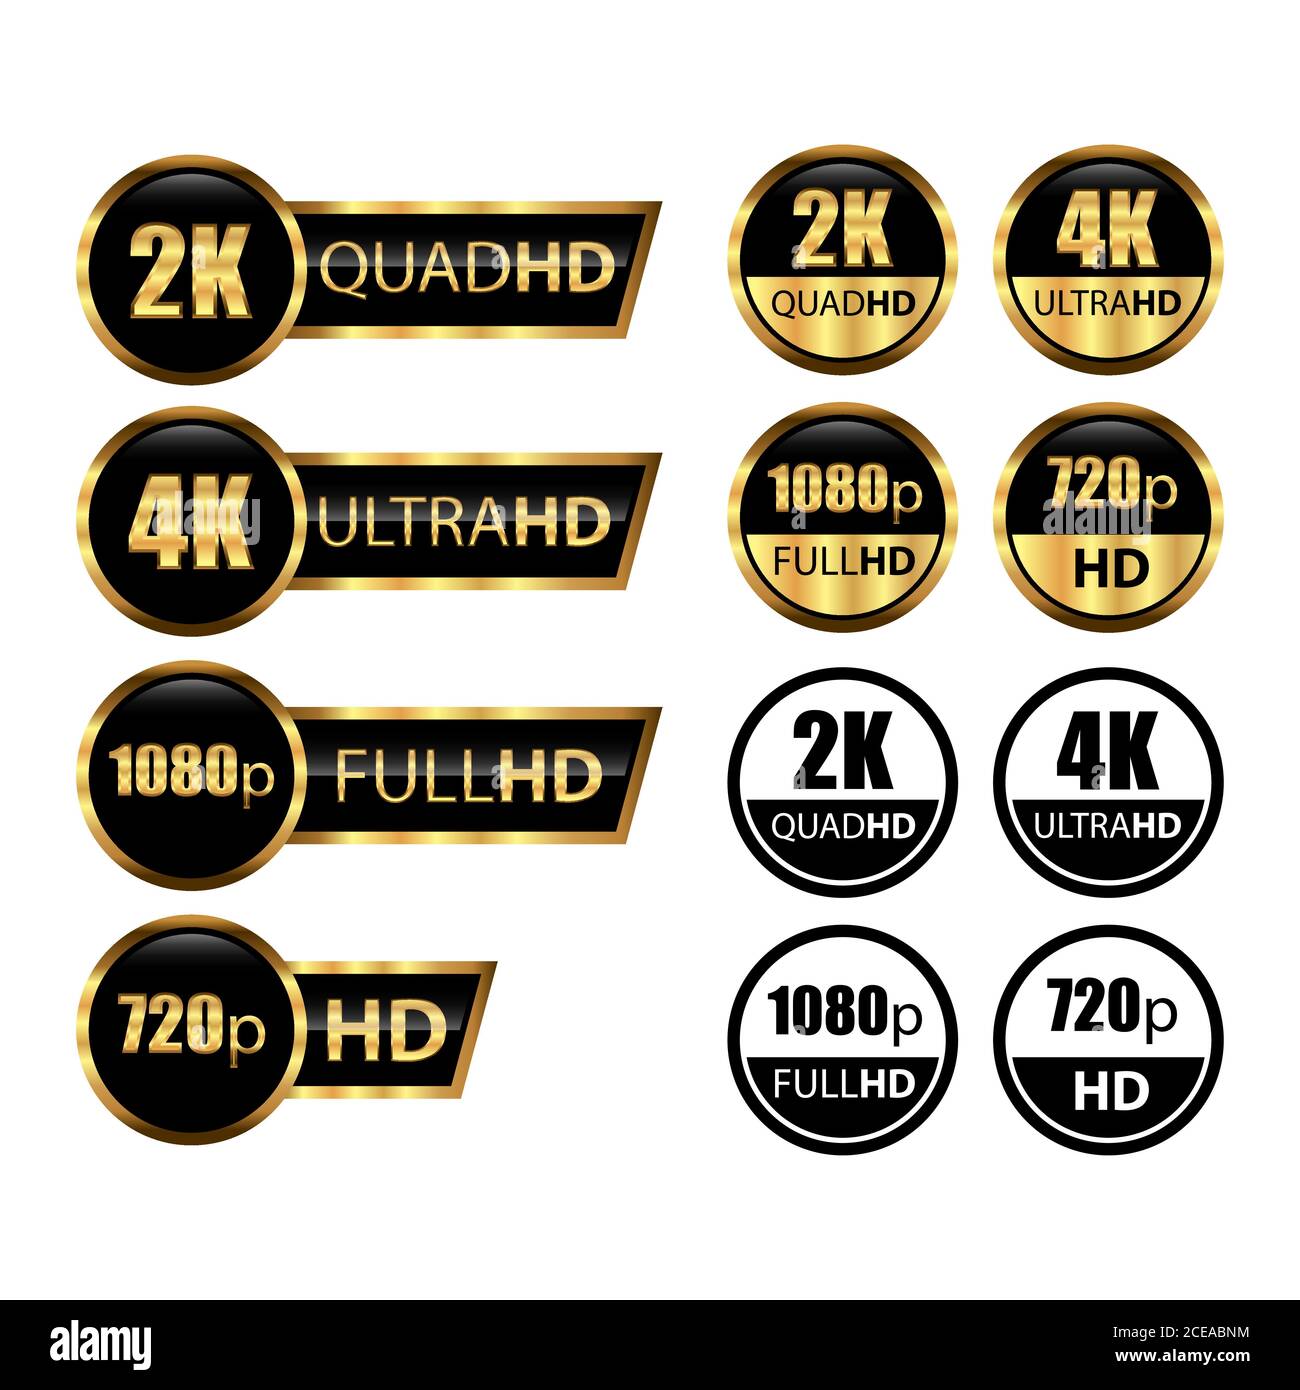 4k ultrahd, 2k quadhd, 1080 fullhd, 720 hd dimensions of video, Video resolution icon logo. TV/Game screen monitor display label. High Definition tags Stock Vector